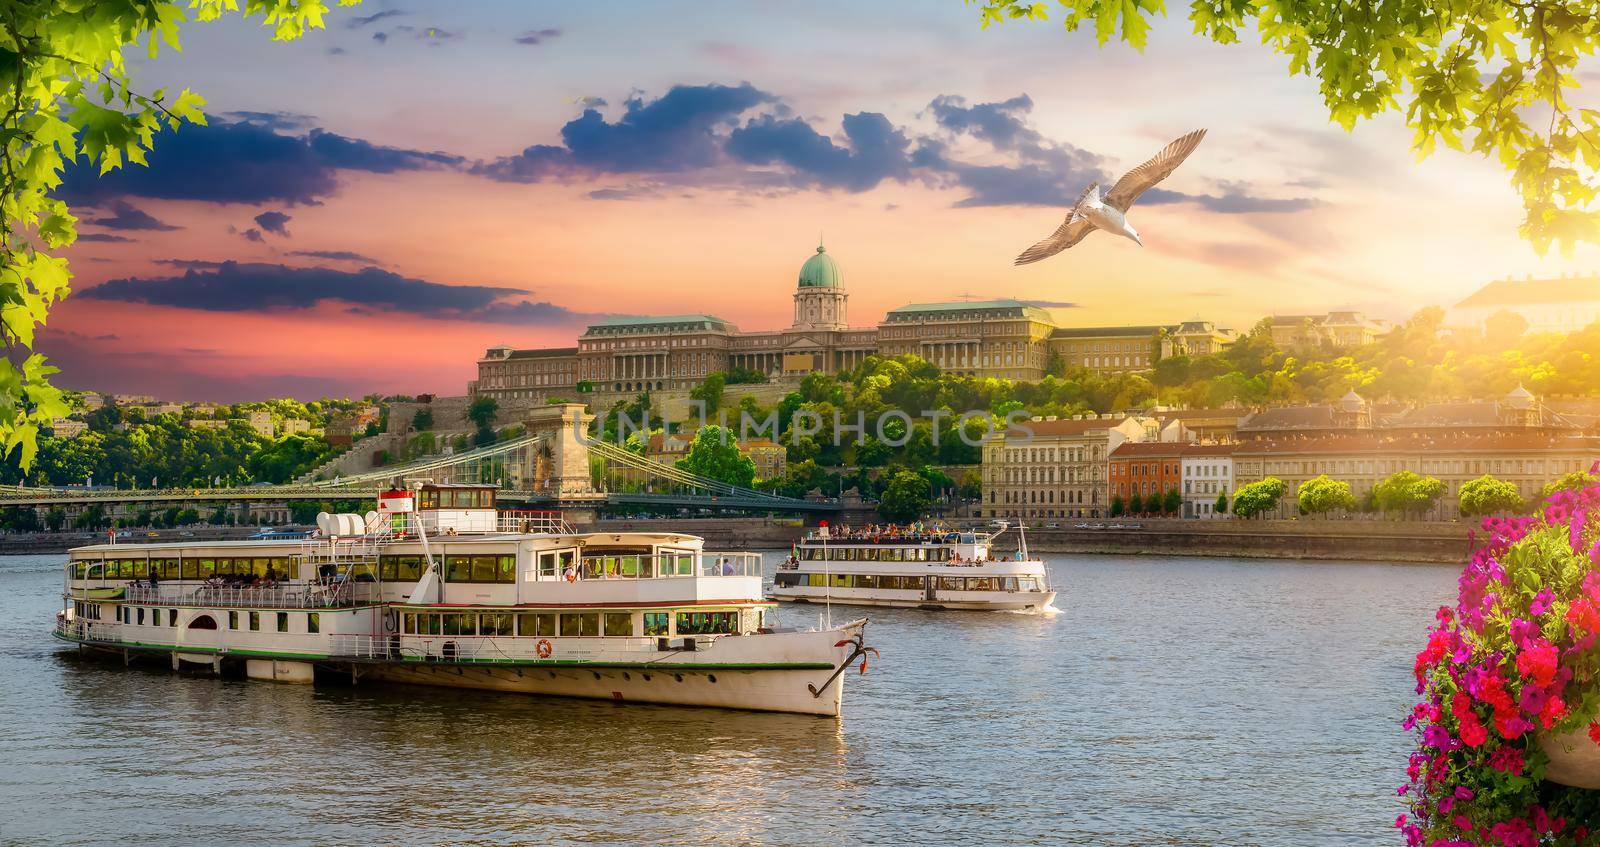 Beautiful view of famous landmarks in Budapest at sunset